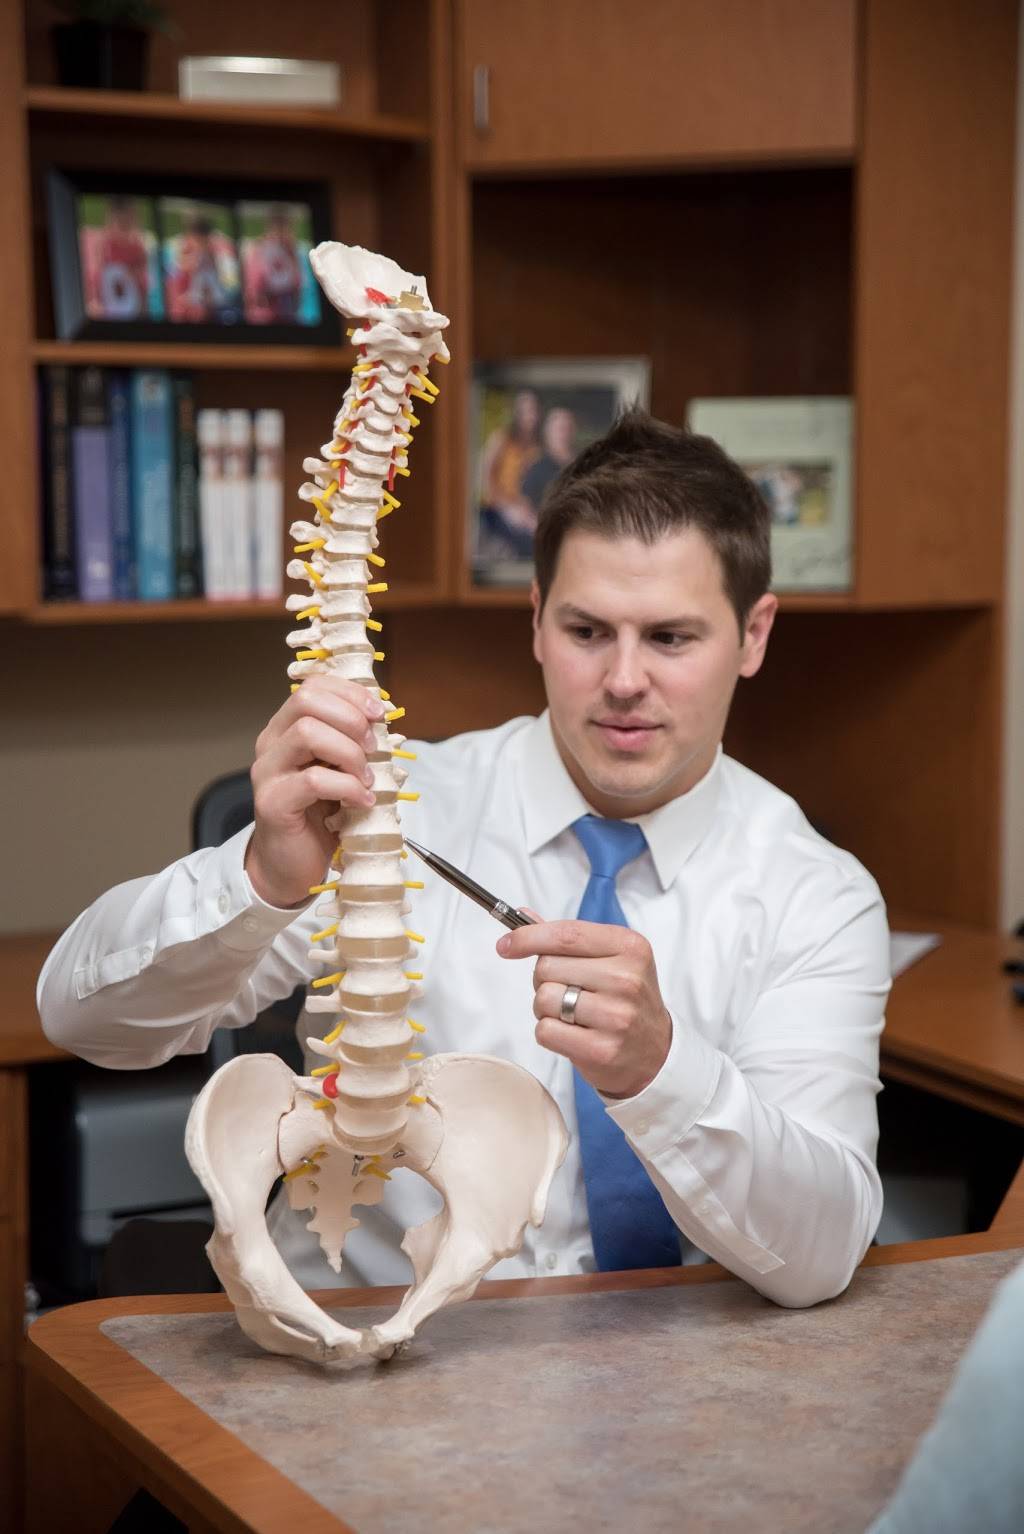 Advanced Chiropractic | 2485 Maplewood Dr Suite 215, Maplewood, MN 55109, USA | Phone: (651) 770-7938